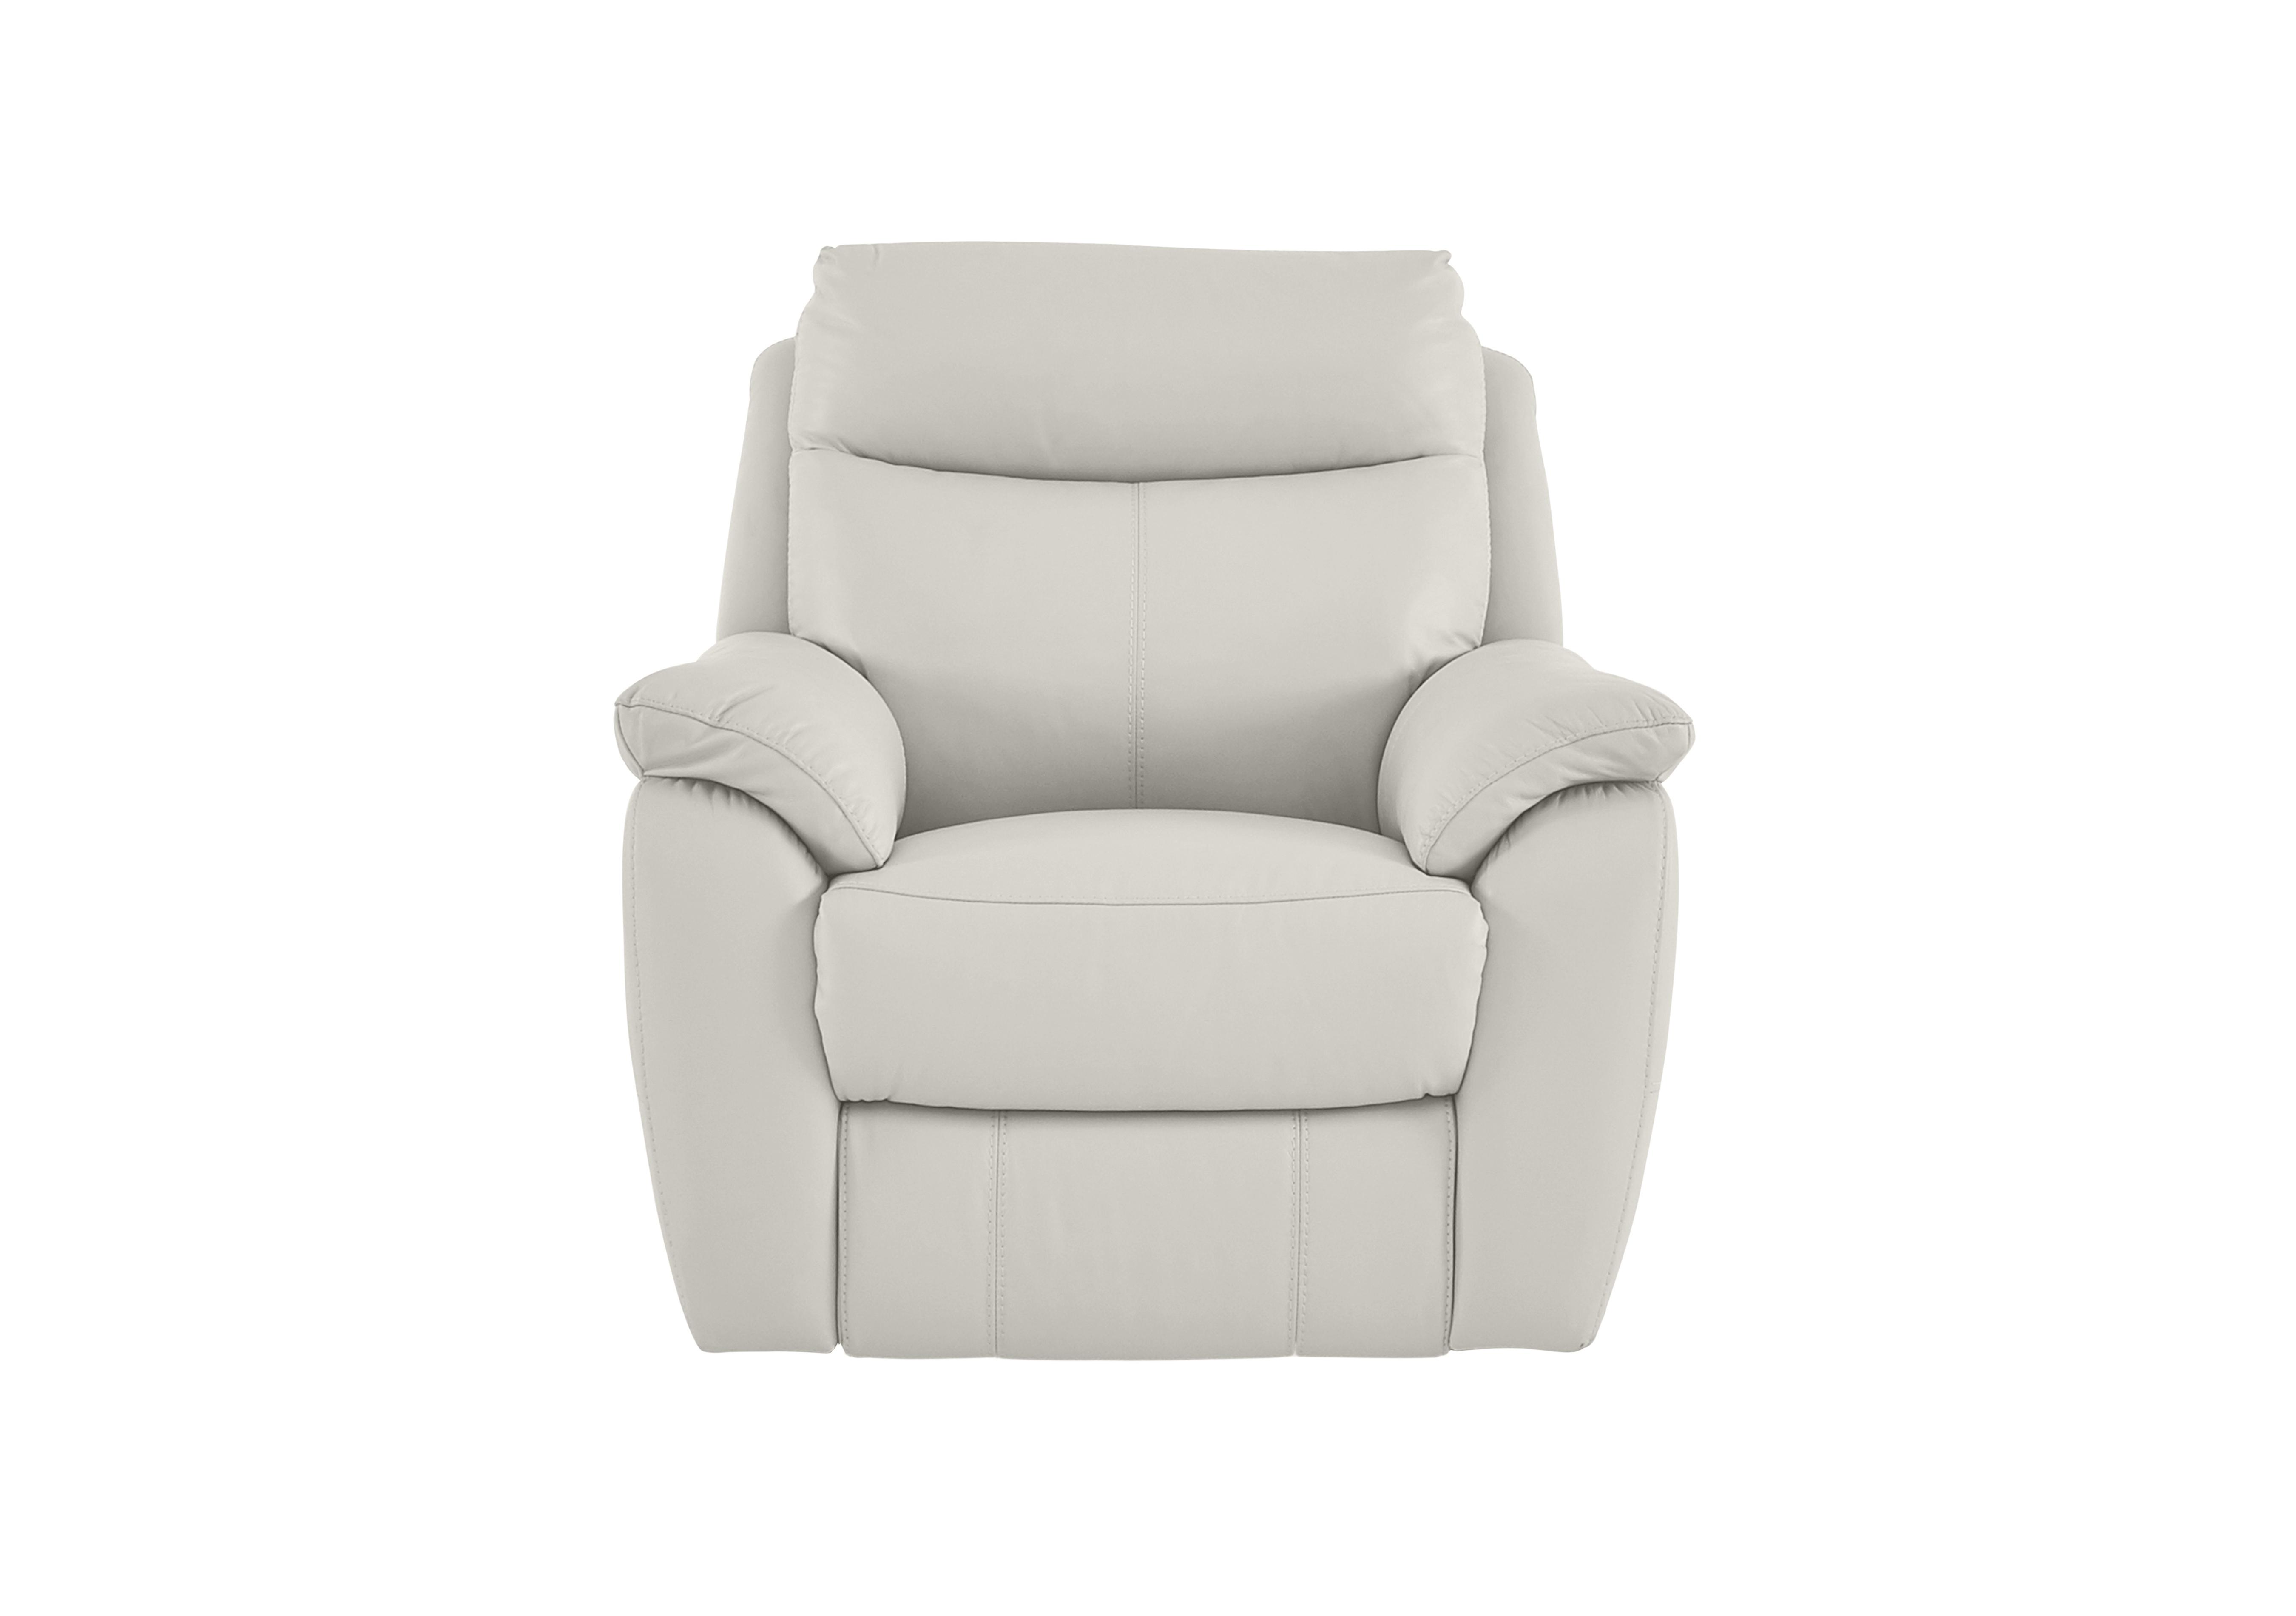 Snug Leather Armchair in Bv-156e Frost on Furniture Village